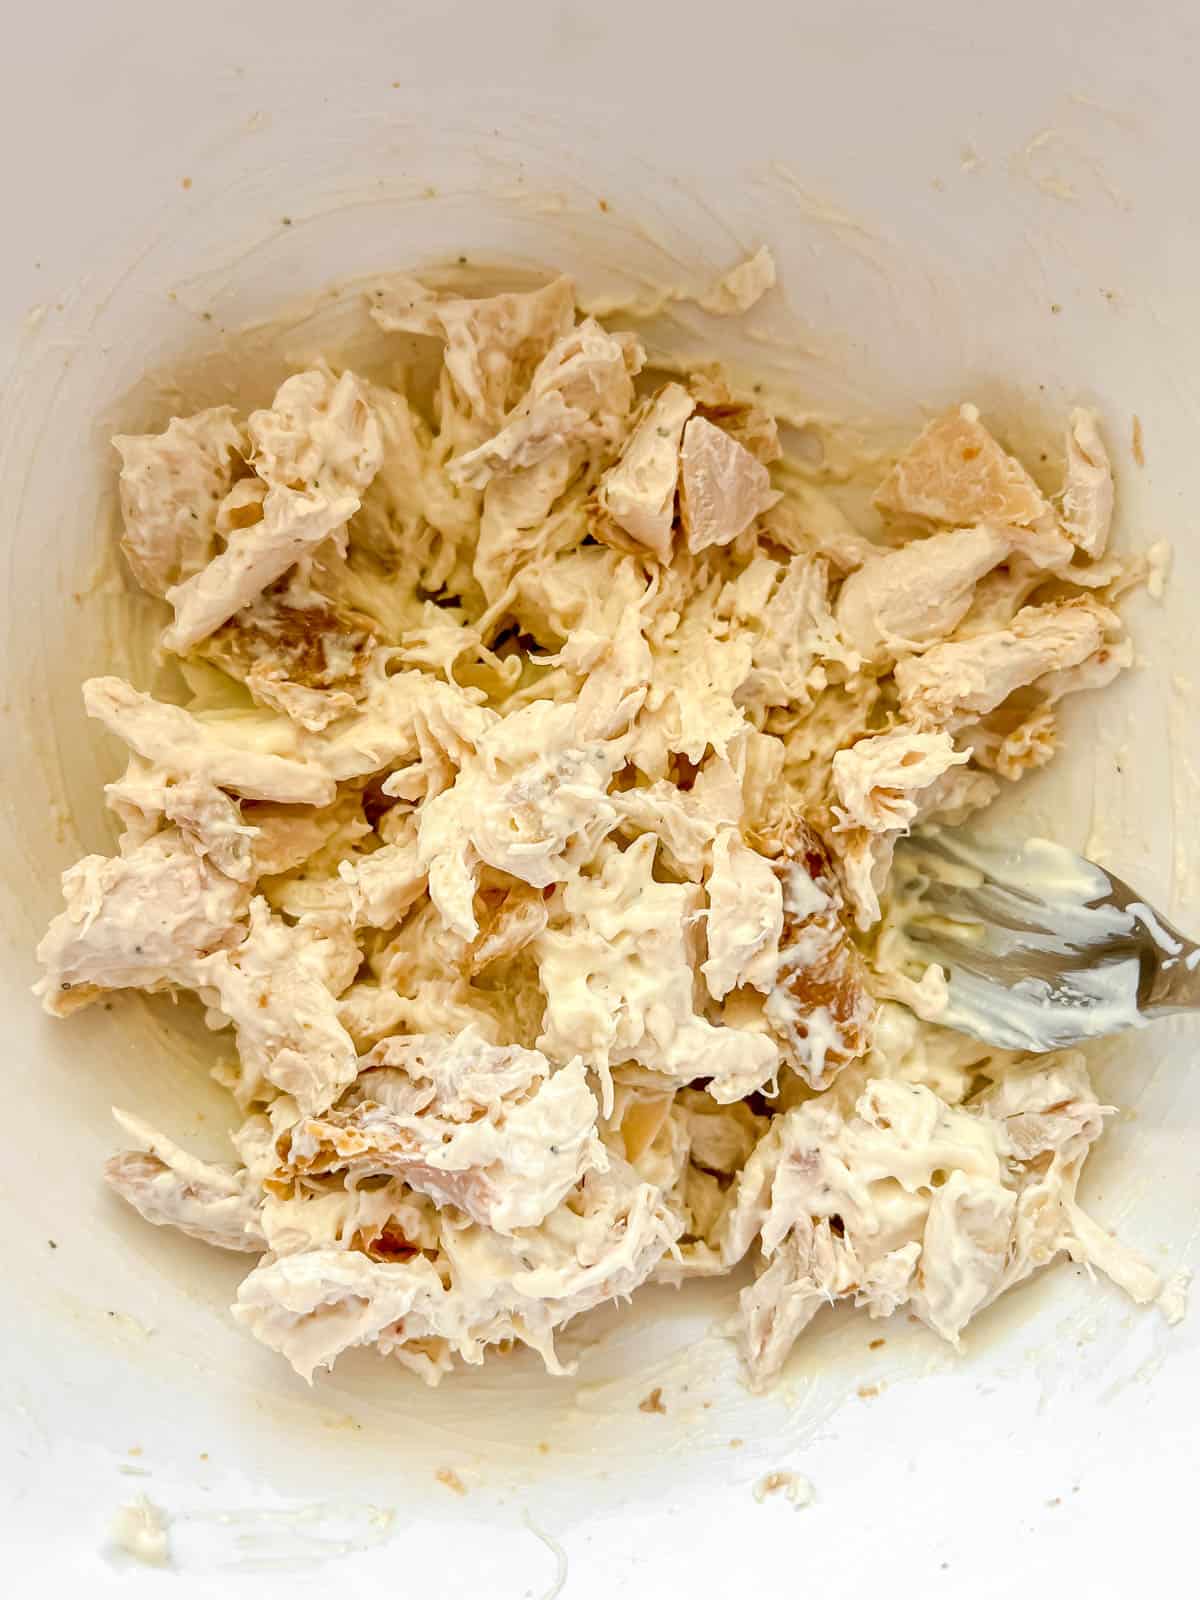 Mayo sauce mixed into chicken.